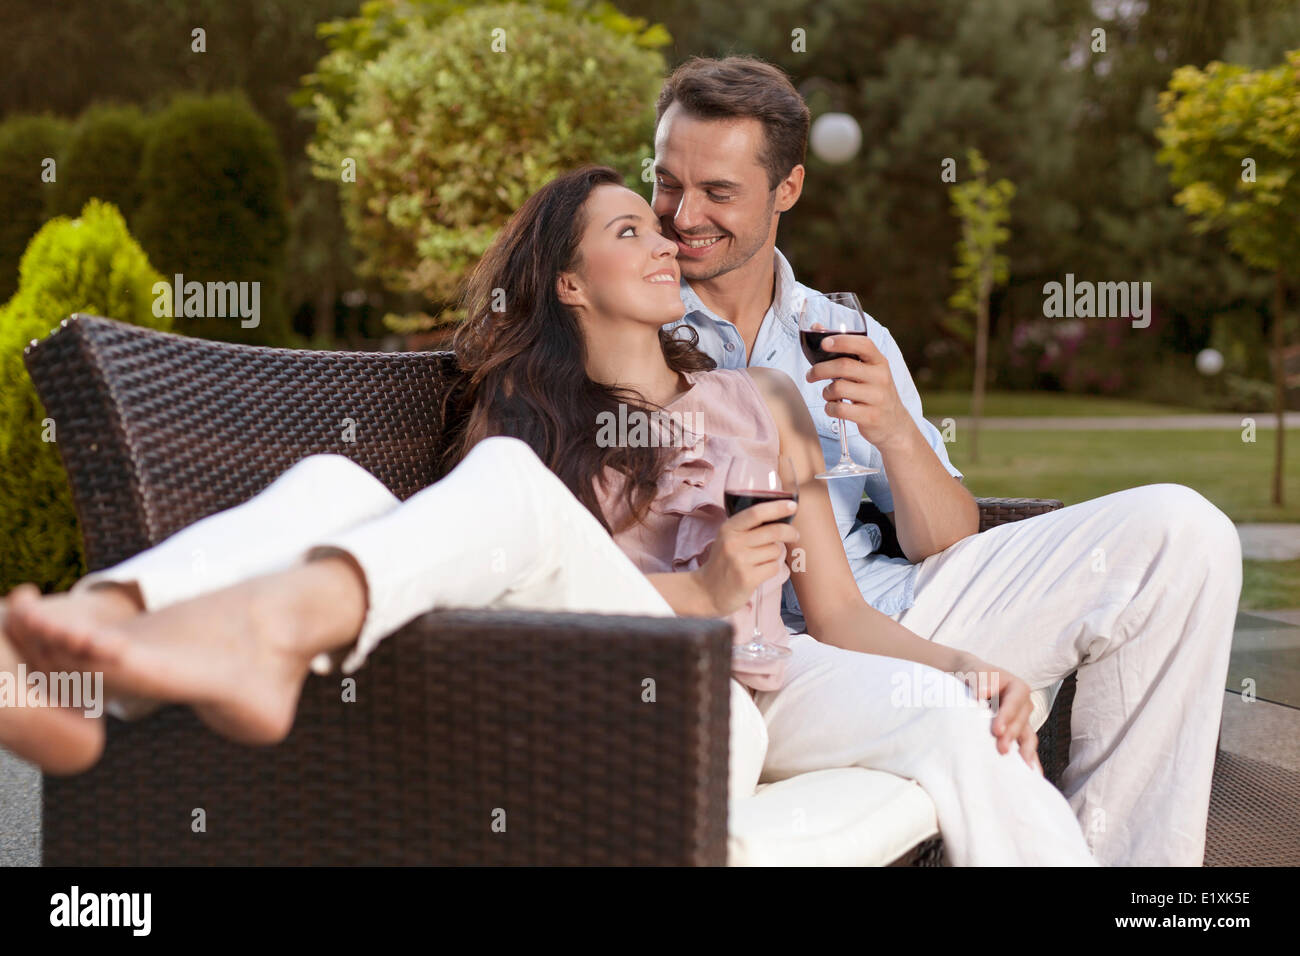 Romantic young holding wine glasses on easy chair in park Stock Photo